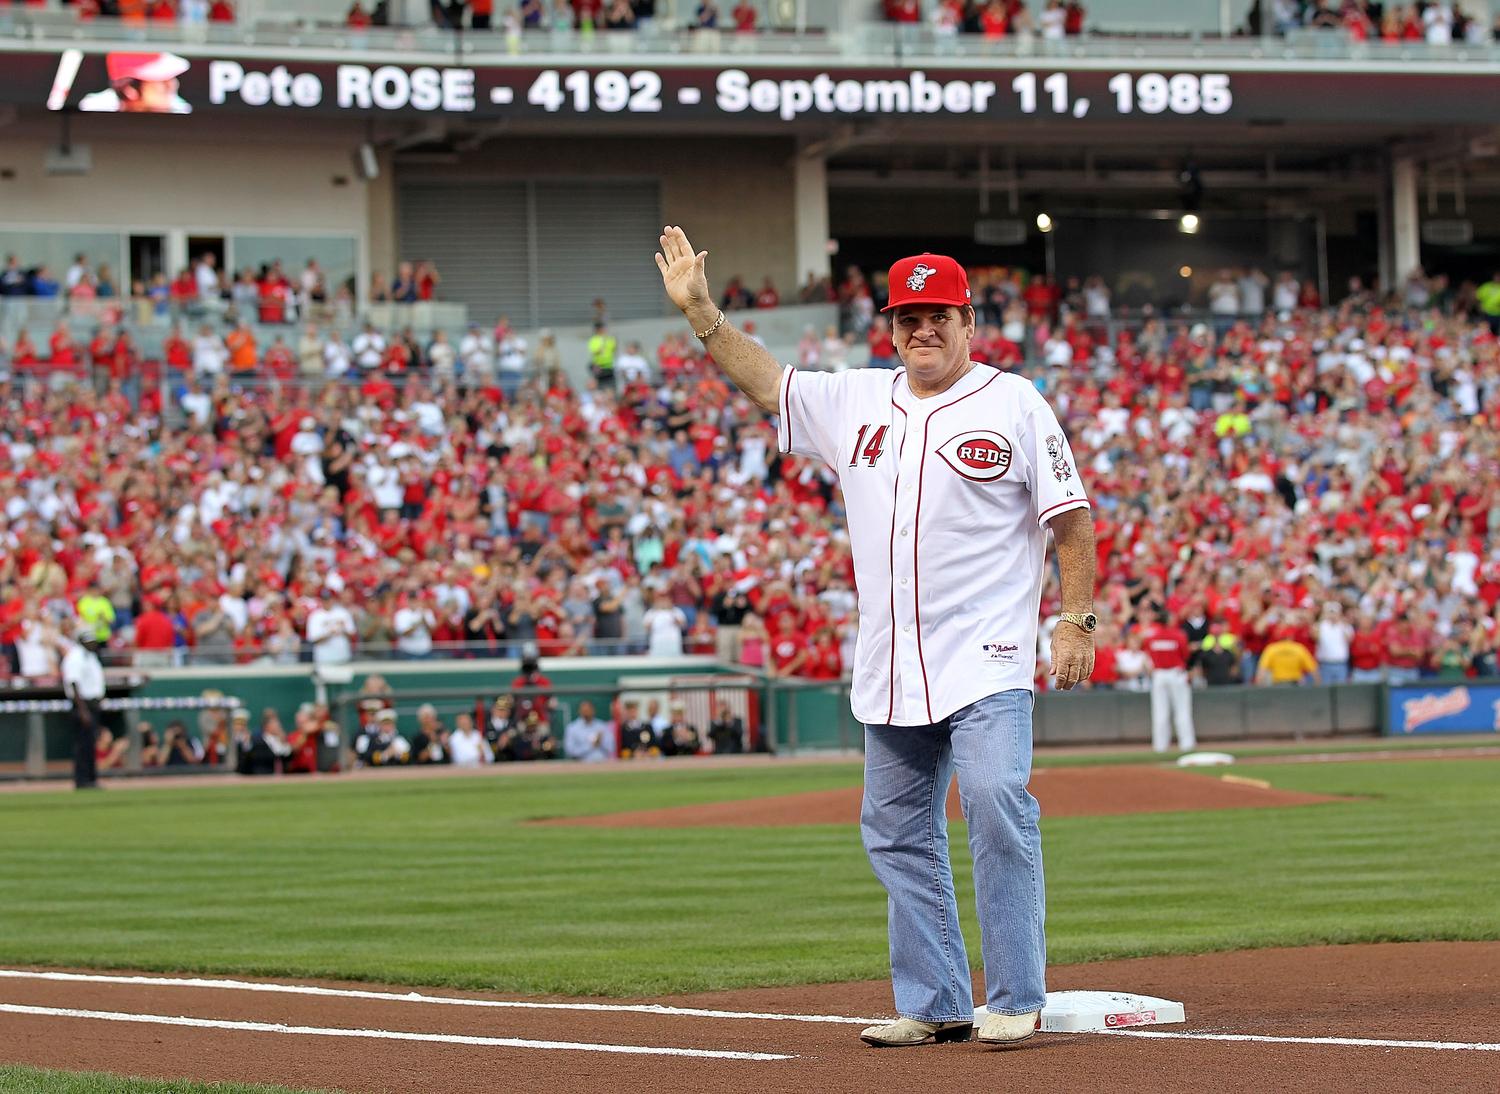 Does Pete Rose Belong in the Hall of Fame? The Leonard Lopate Show WQXR